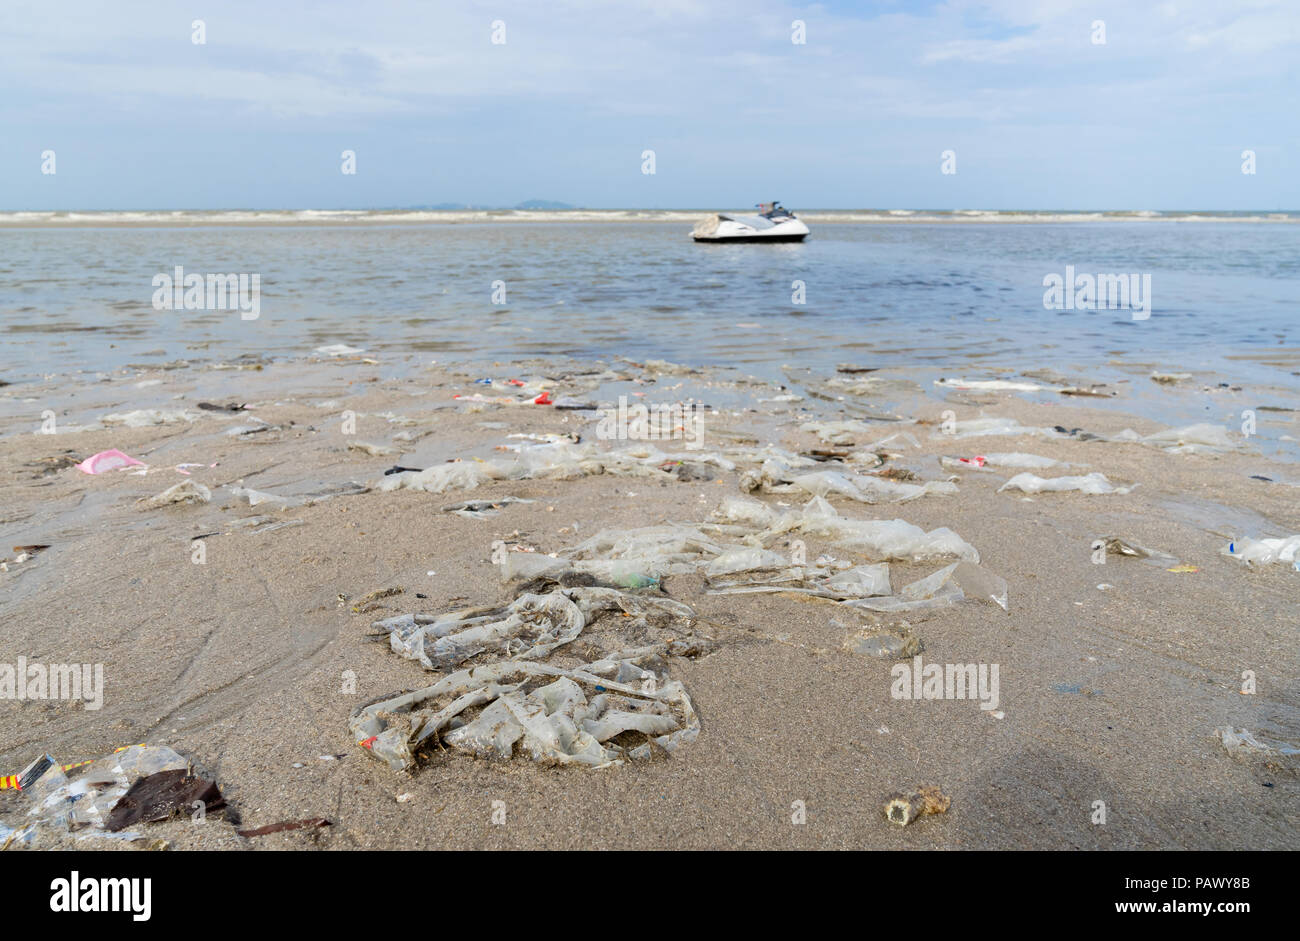 Plastic Rubbish washed up on a beach Stock Photo